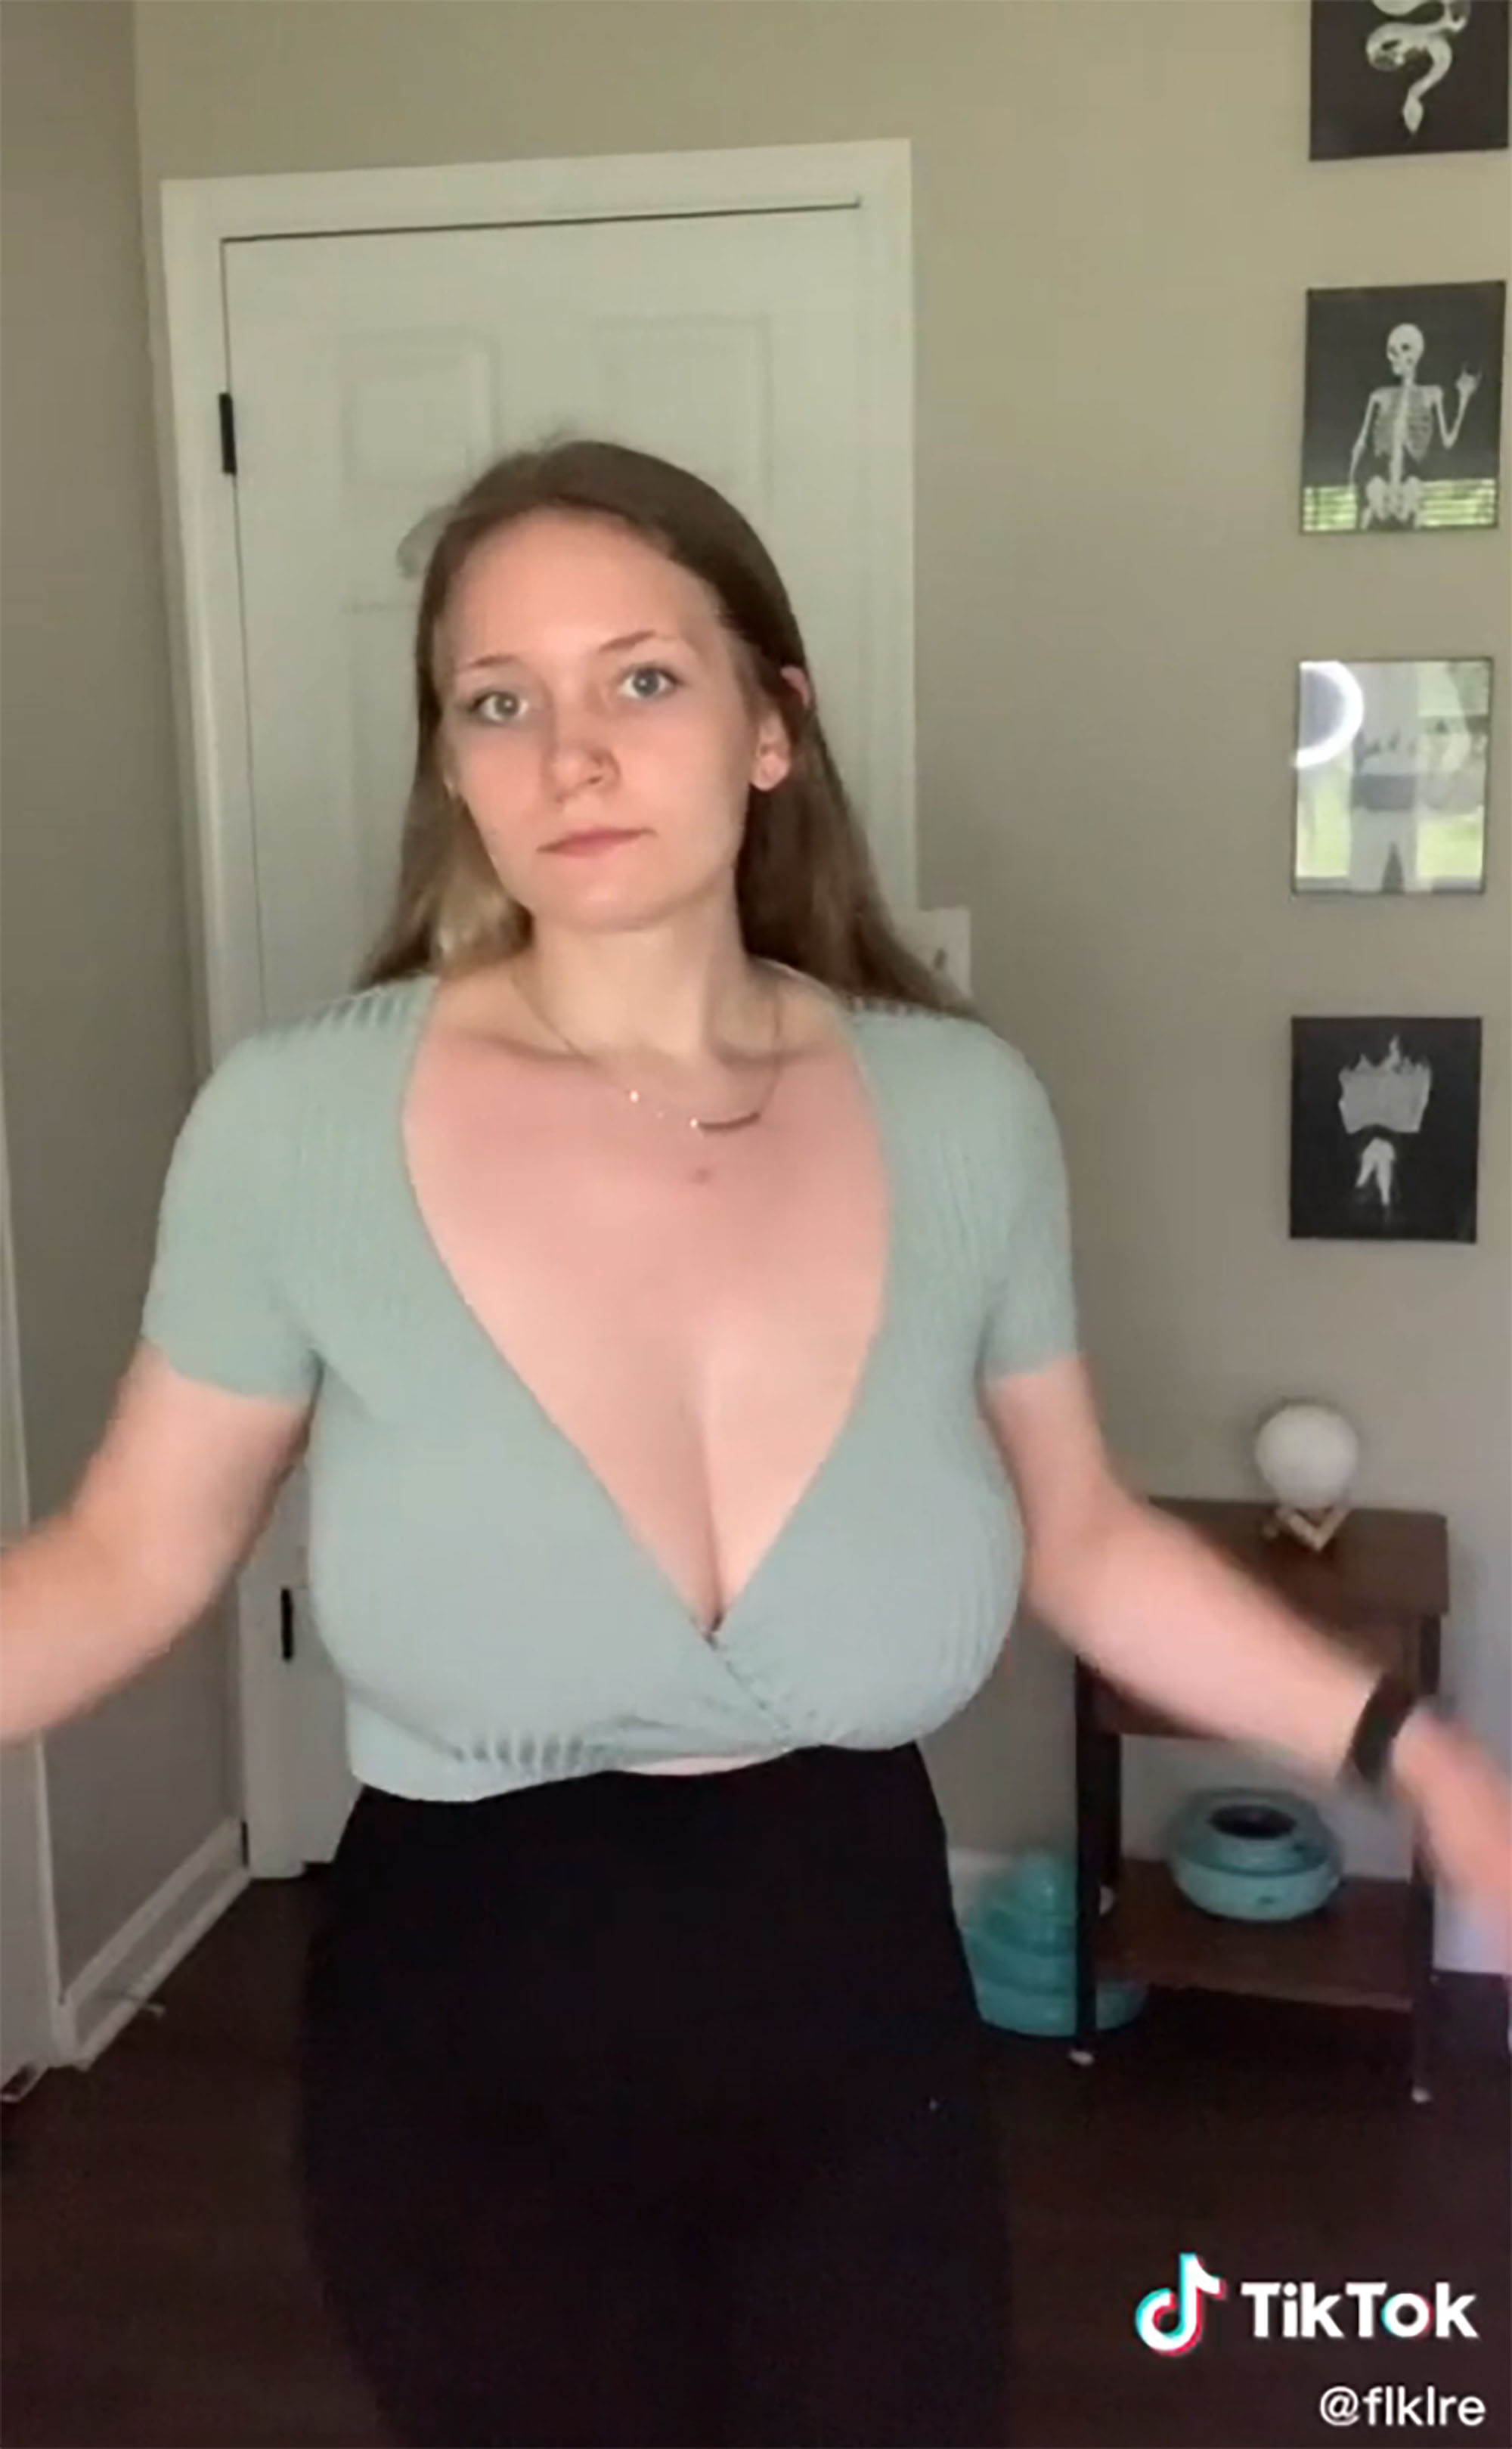 aimee david recommends mom can i see your boobs pic